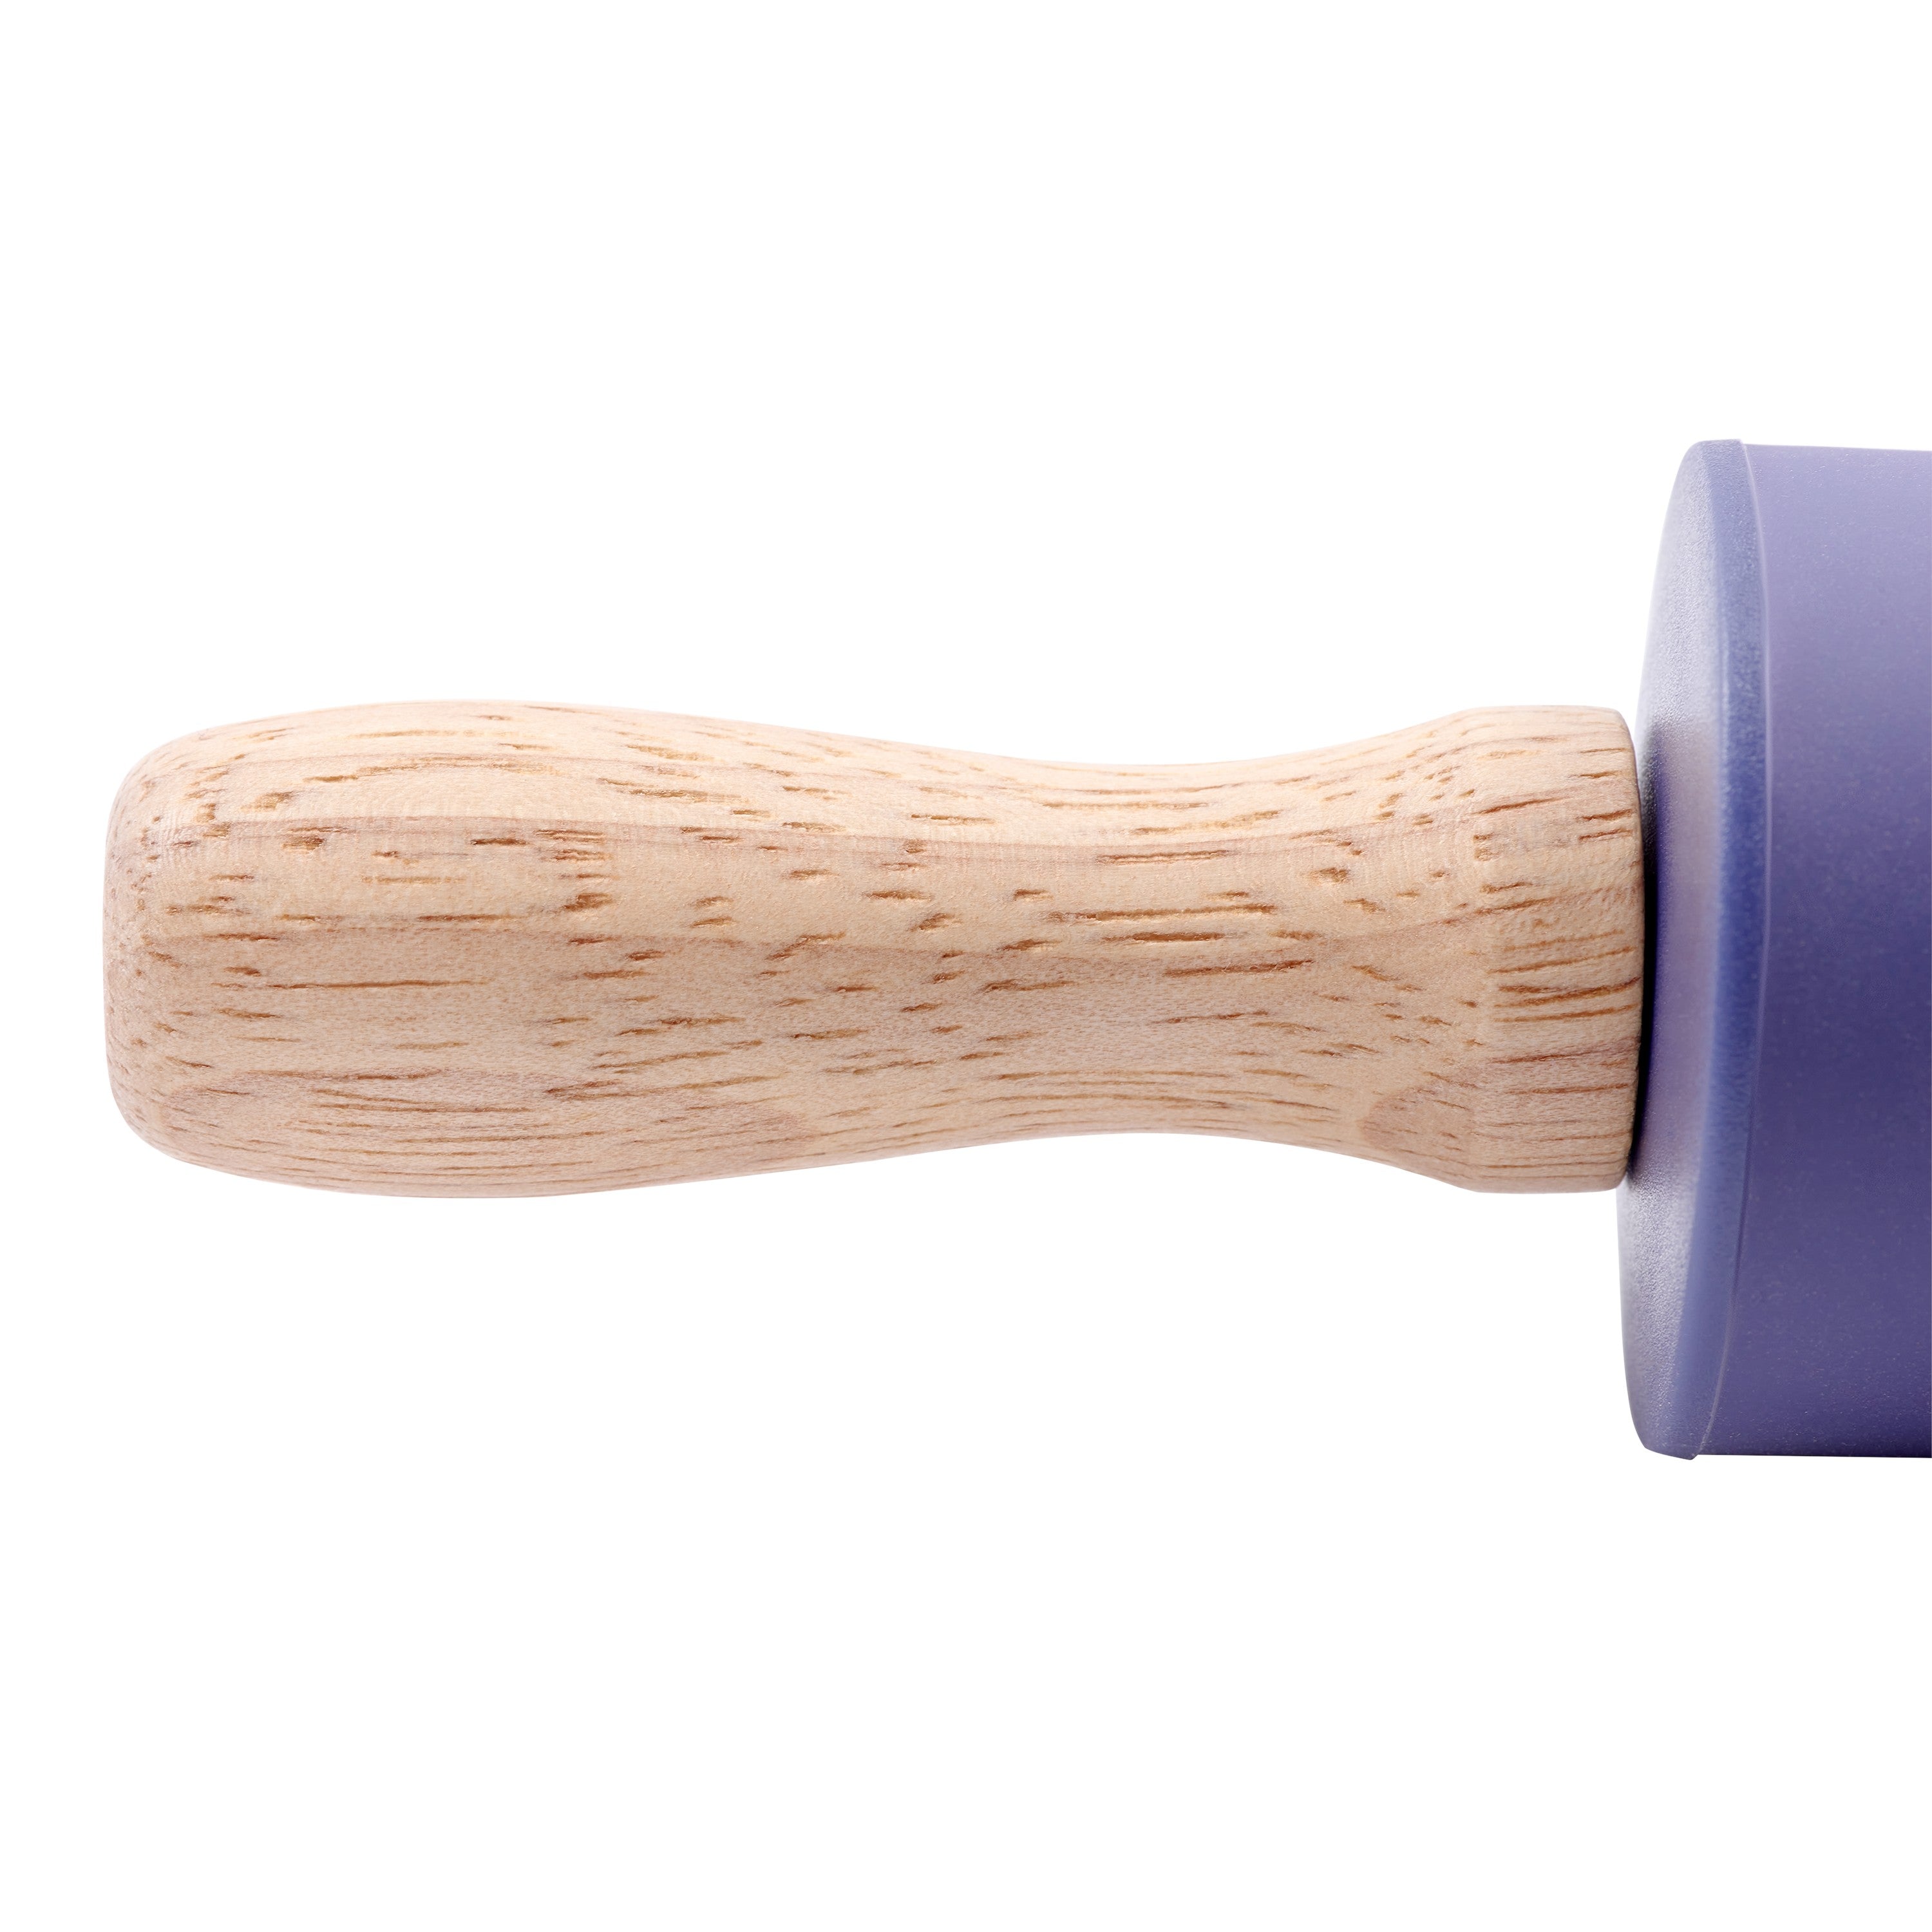 Silicone rolling pin Smart Сhef